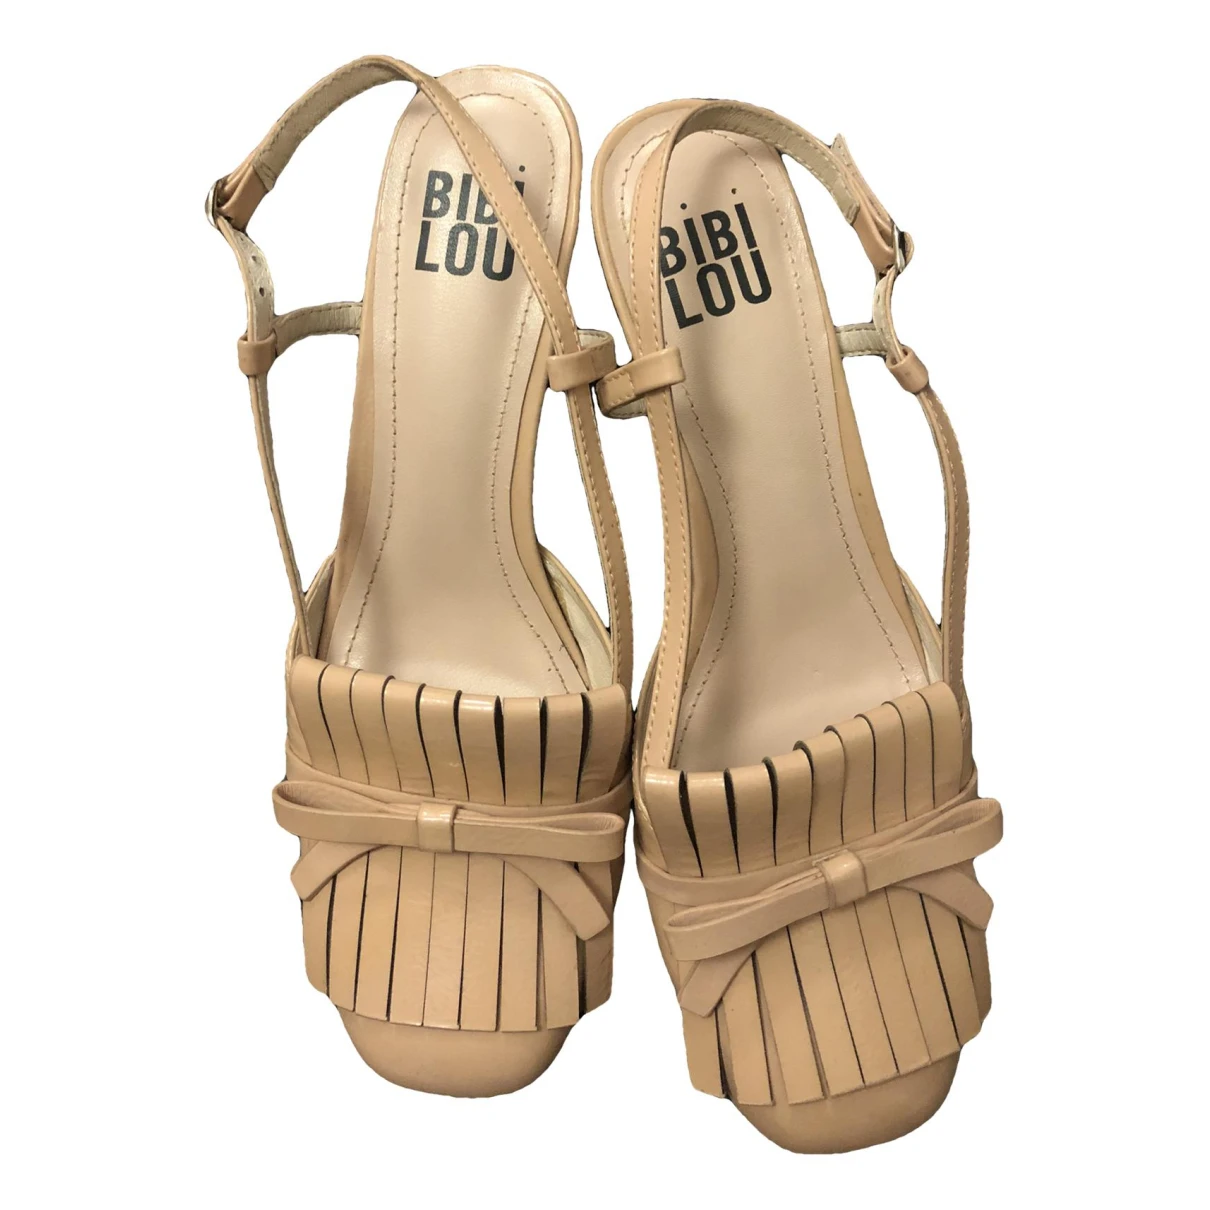 Pre-owned Bibi Lou Patent Leather Heels In Beige